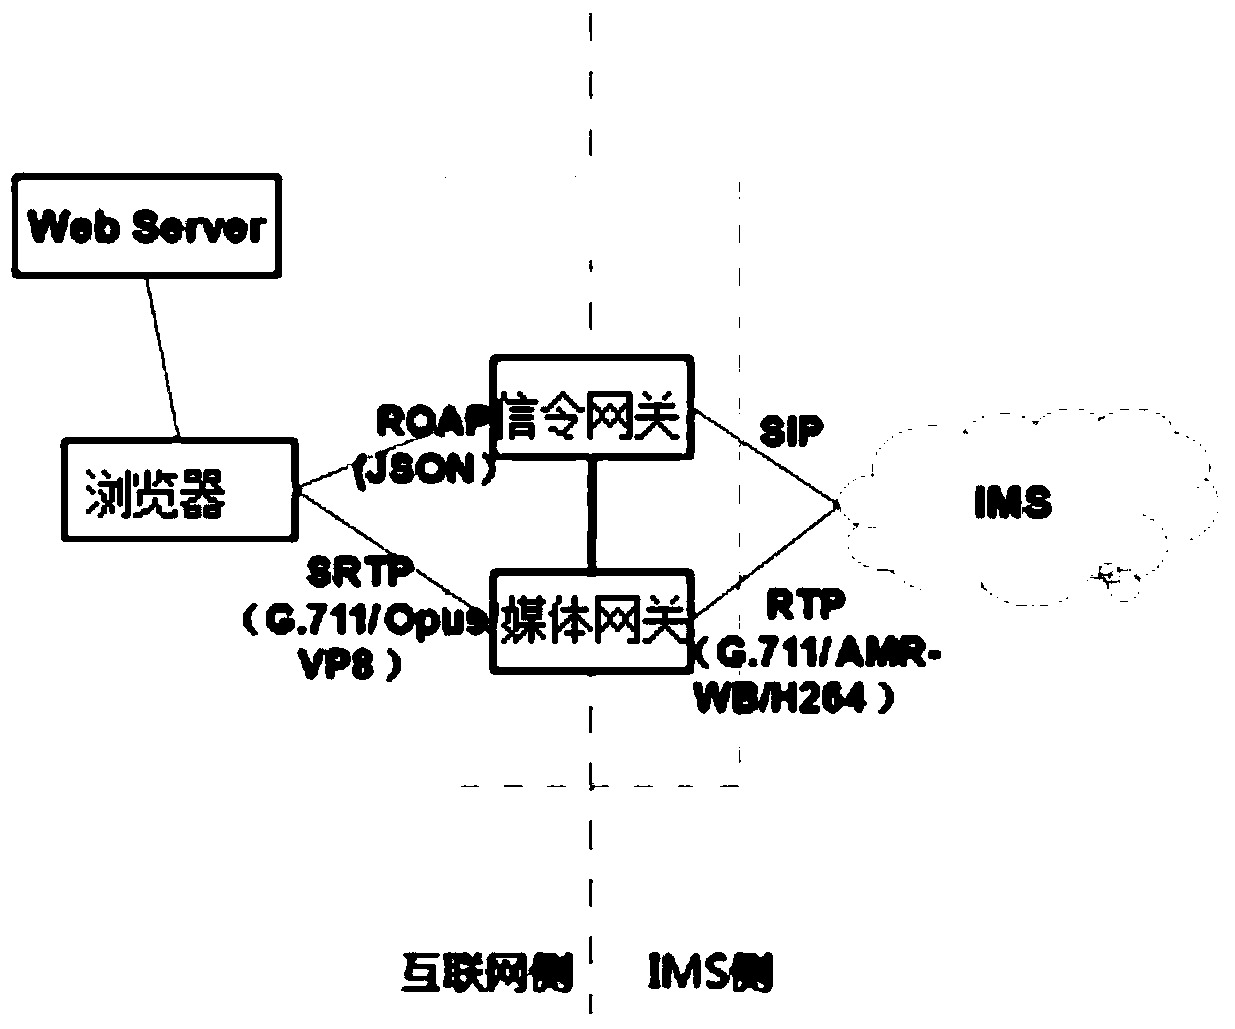 A method, device and communication system for a browser to access an IMS network